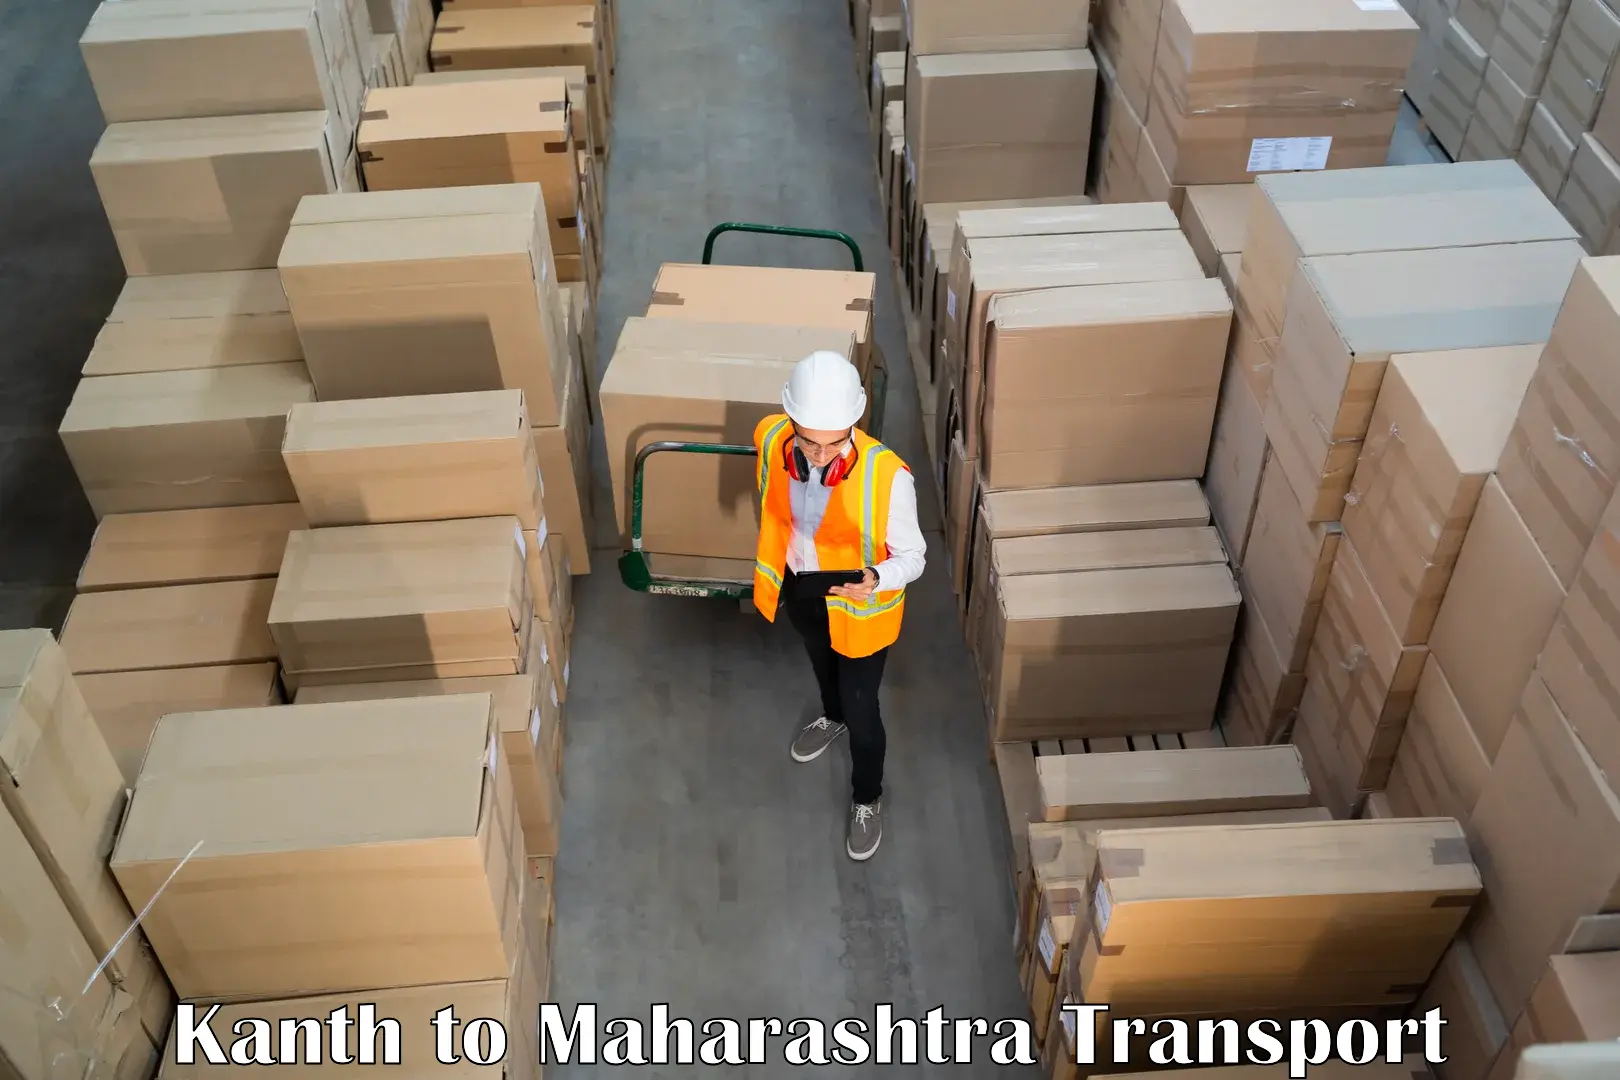 Daily parcel service transport Kanth to Pune